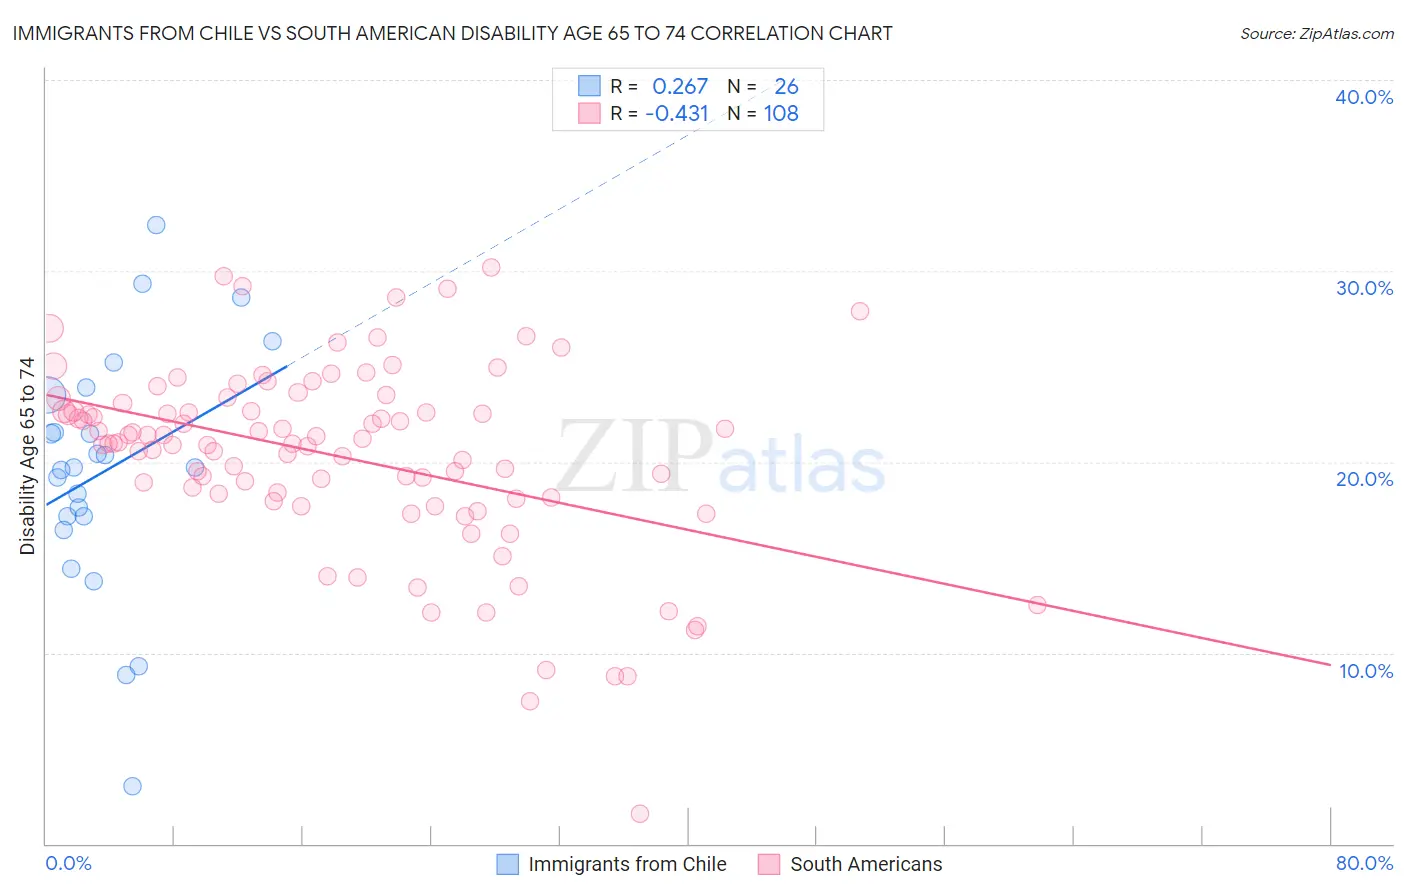 Immigrants from Chile vs South American Disability Age 65 to 74